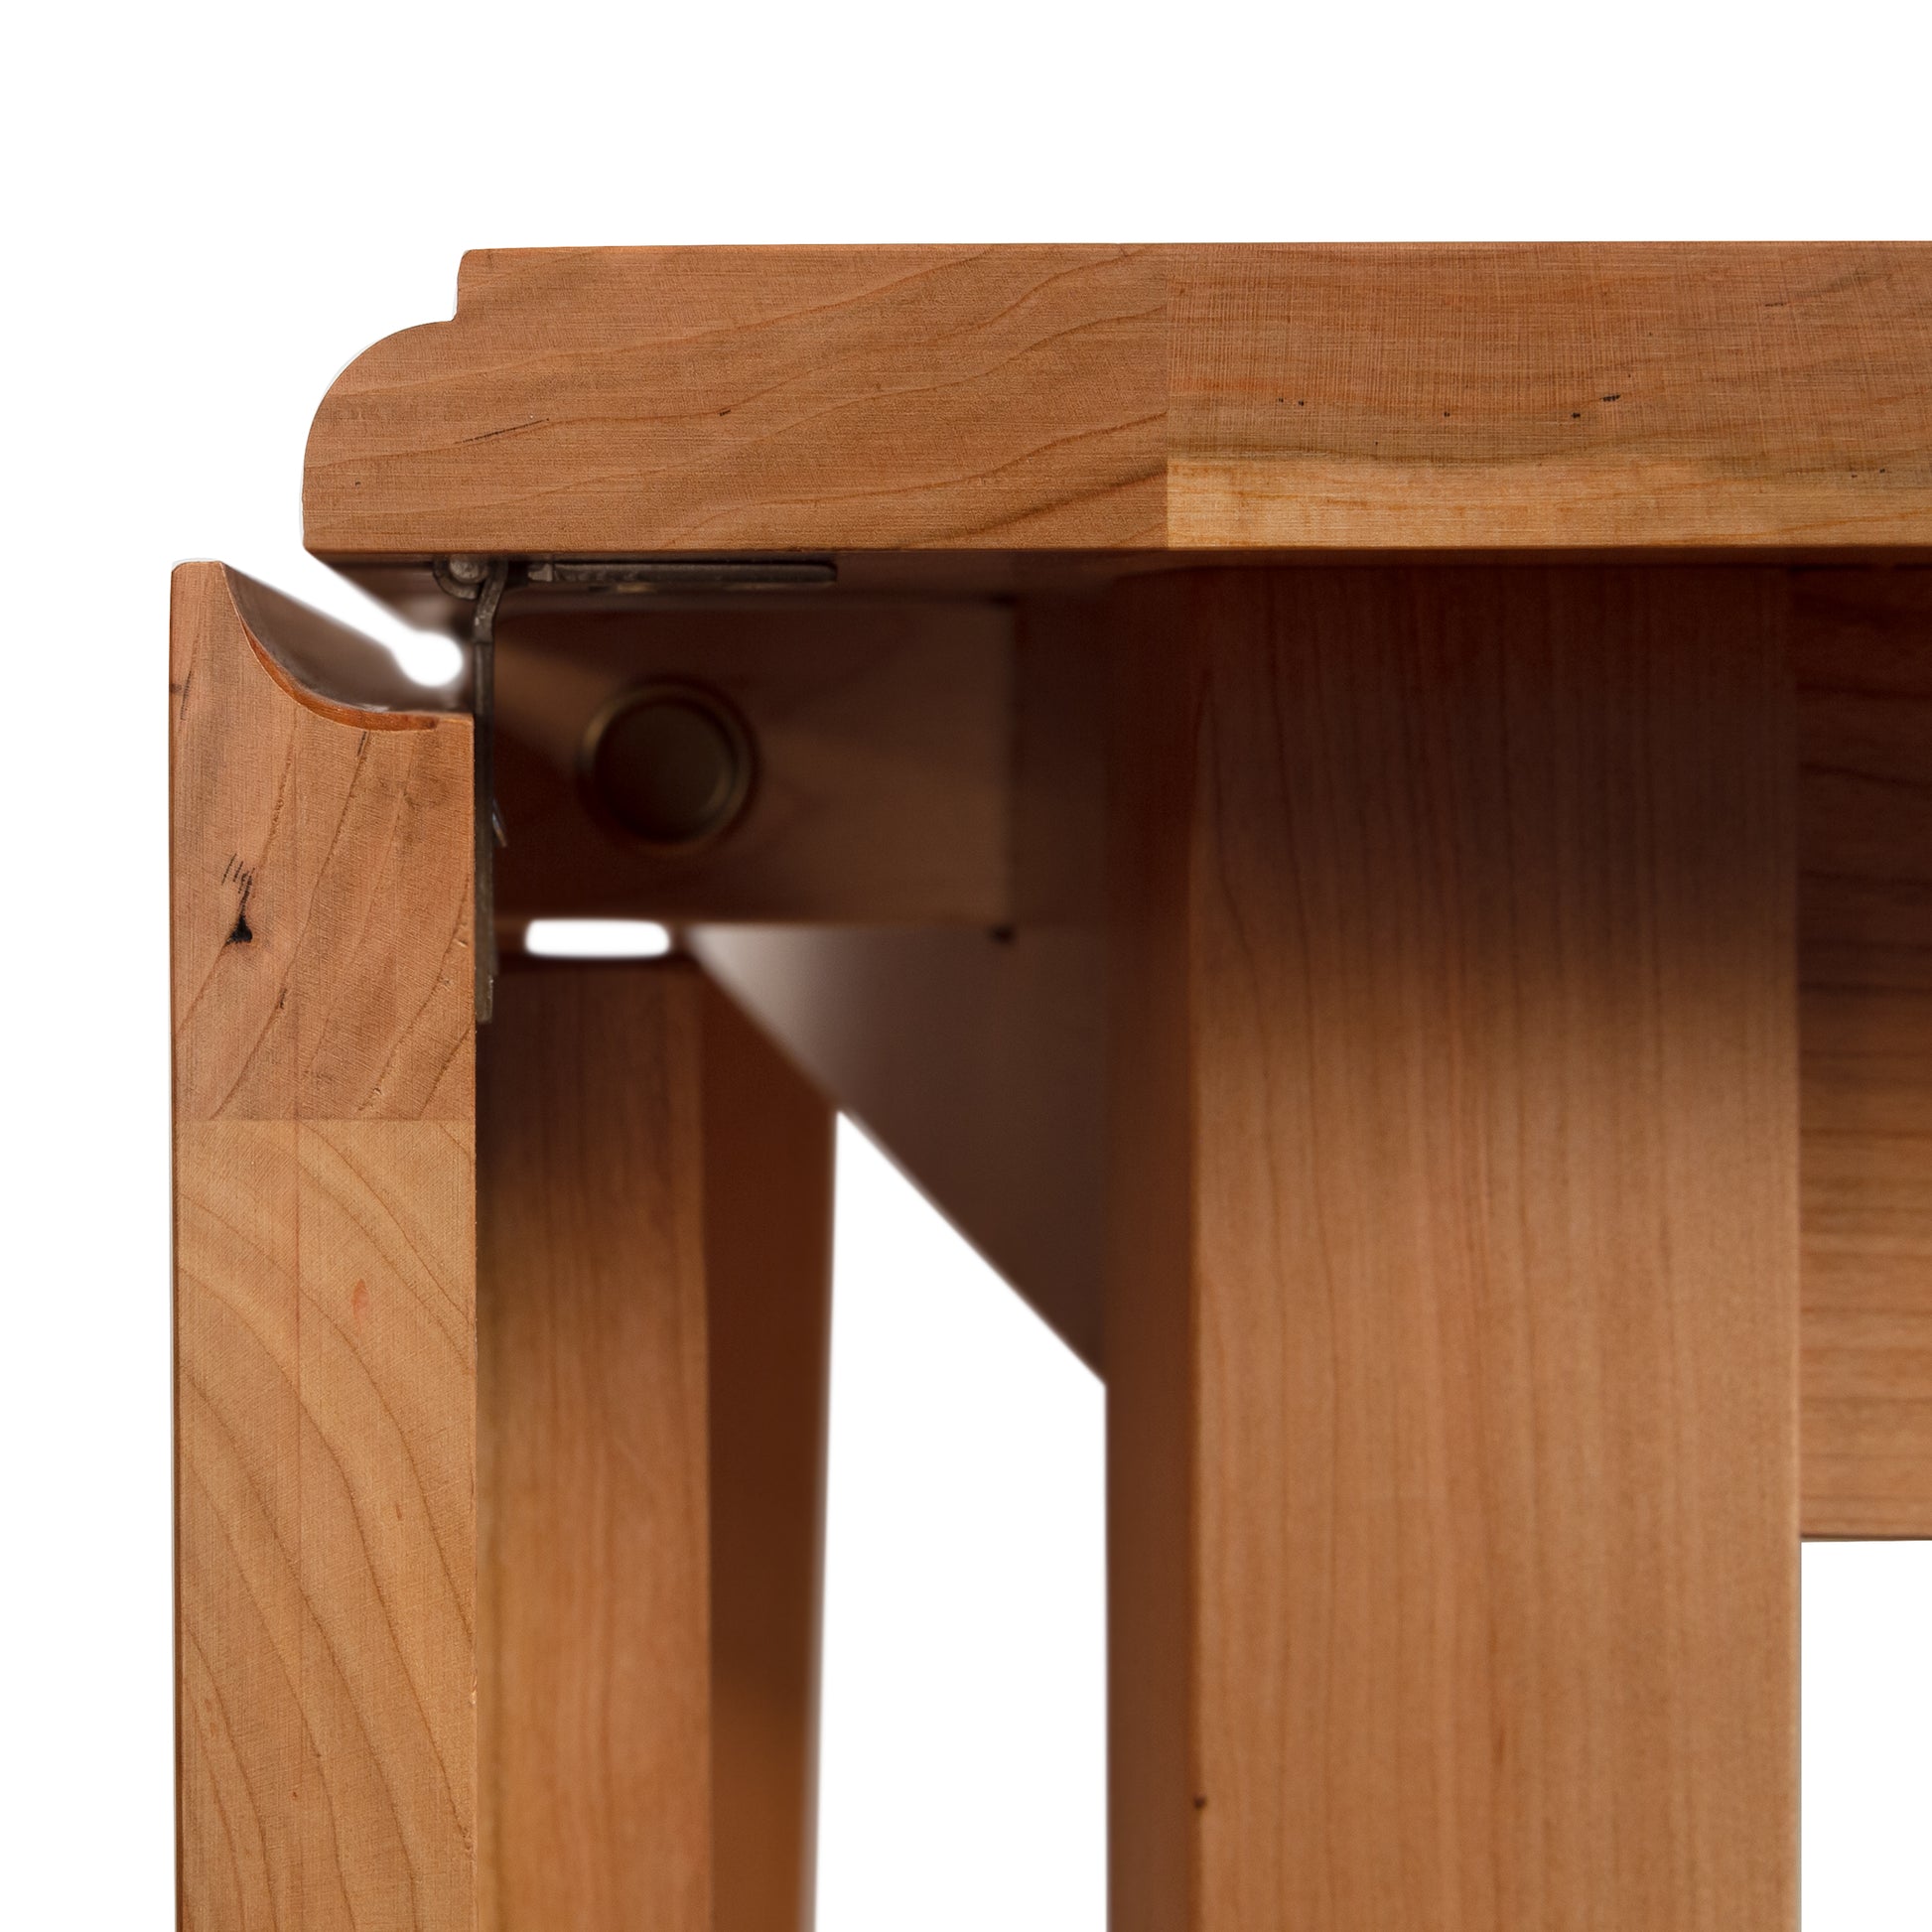 A close up view of a Lyndon Furniture drop leaf table in a kitchen or dining room.